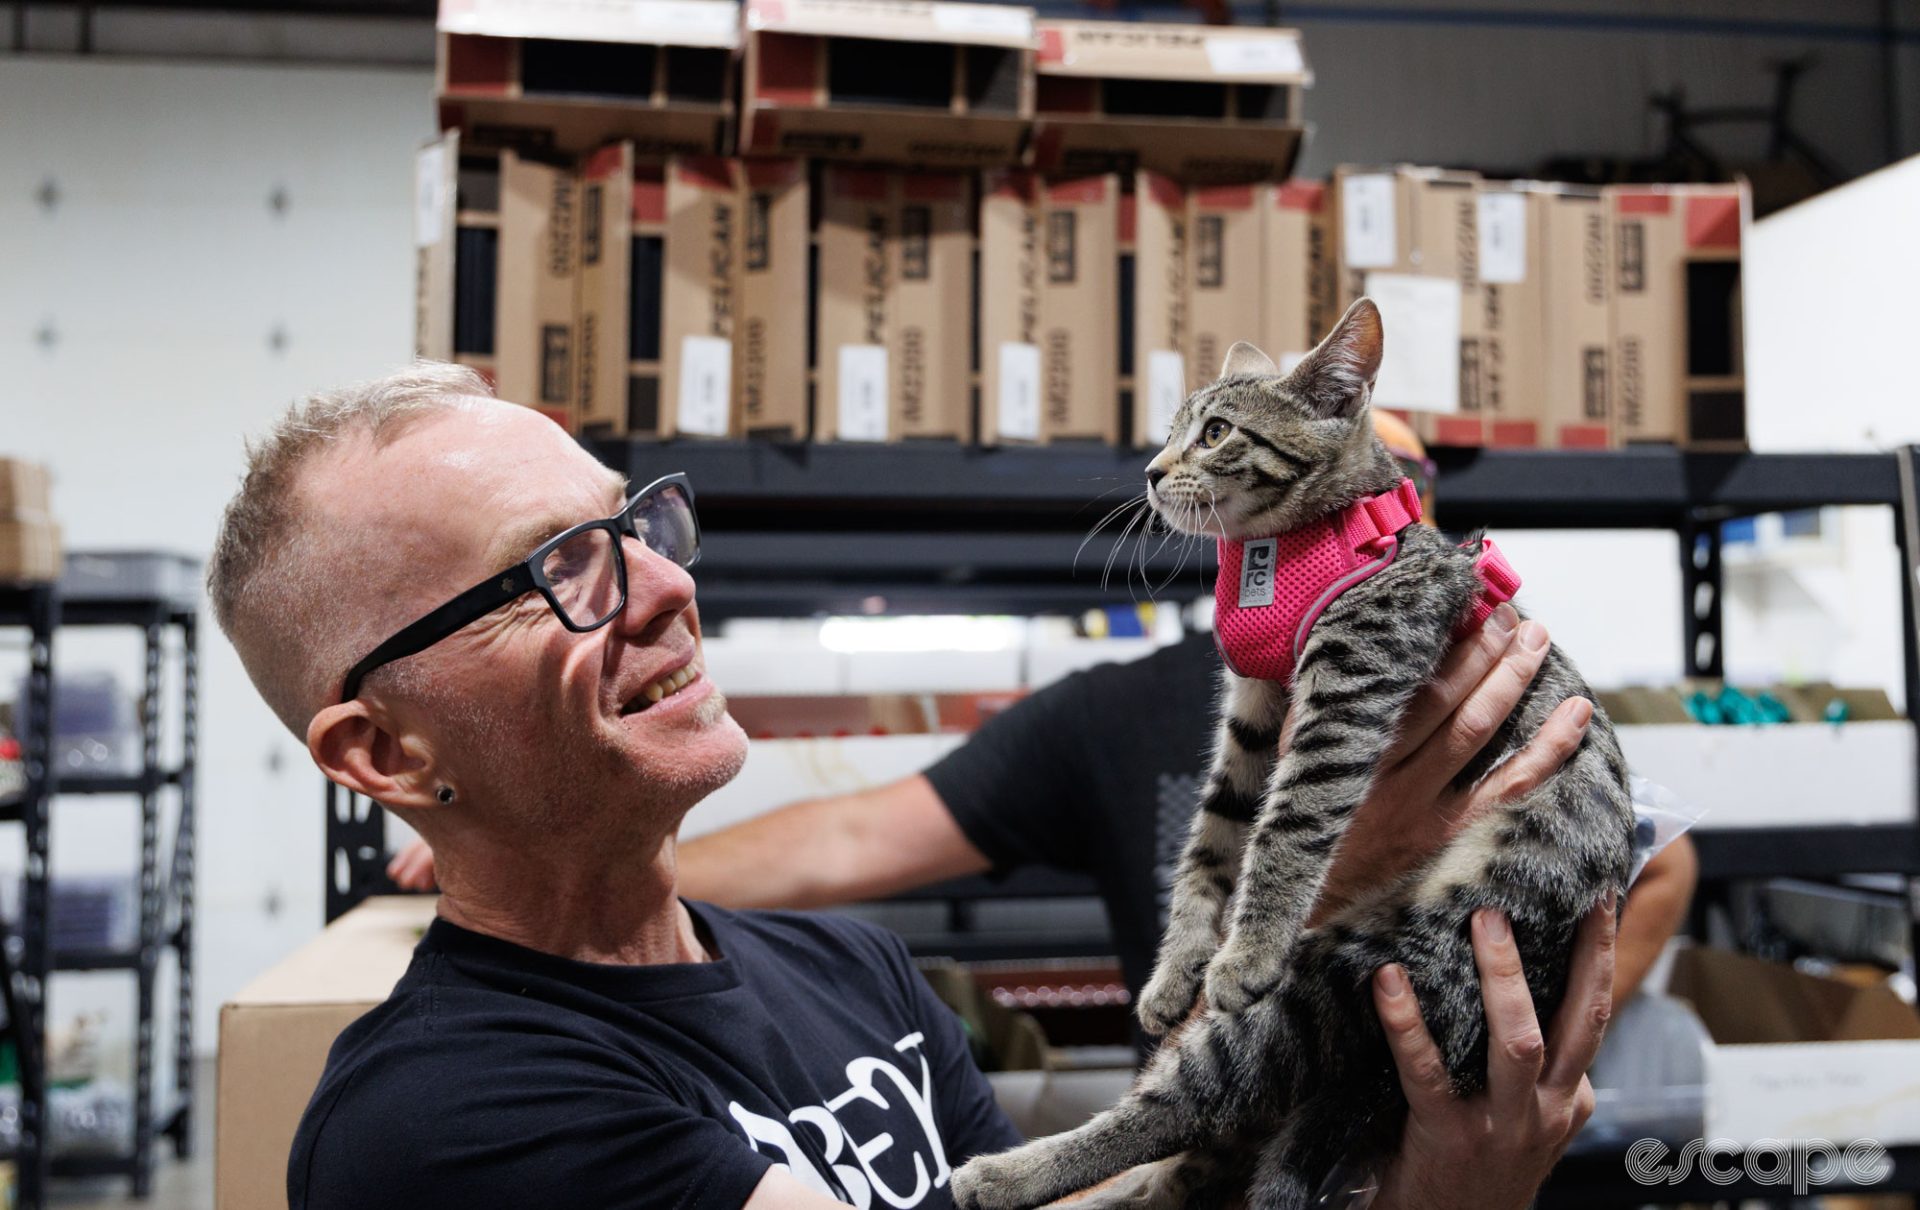 Employee Mark holds up a cute, tiger-striped cat wearing a coral-pink harness. Mark is smiling, while the cat, Tea Cup, looks off into the middle distance.